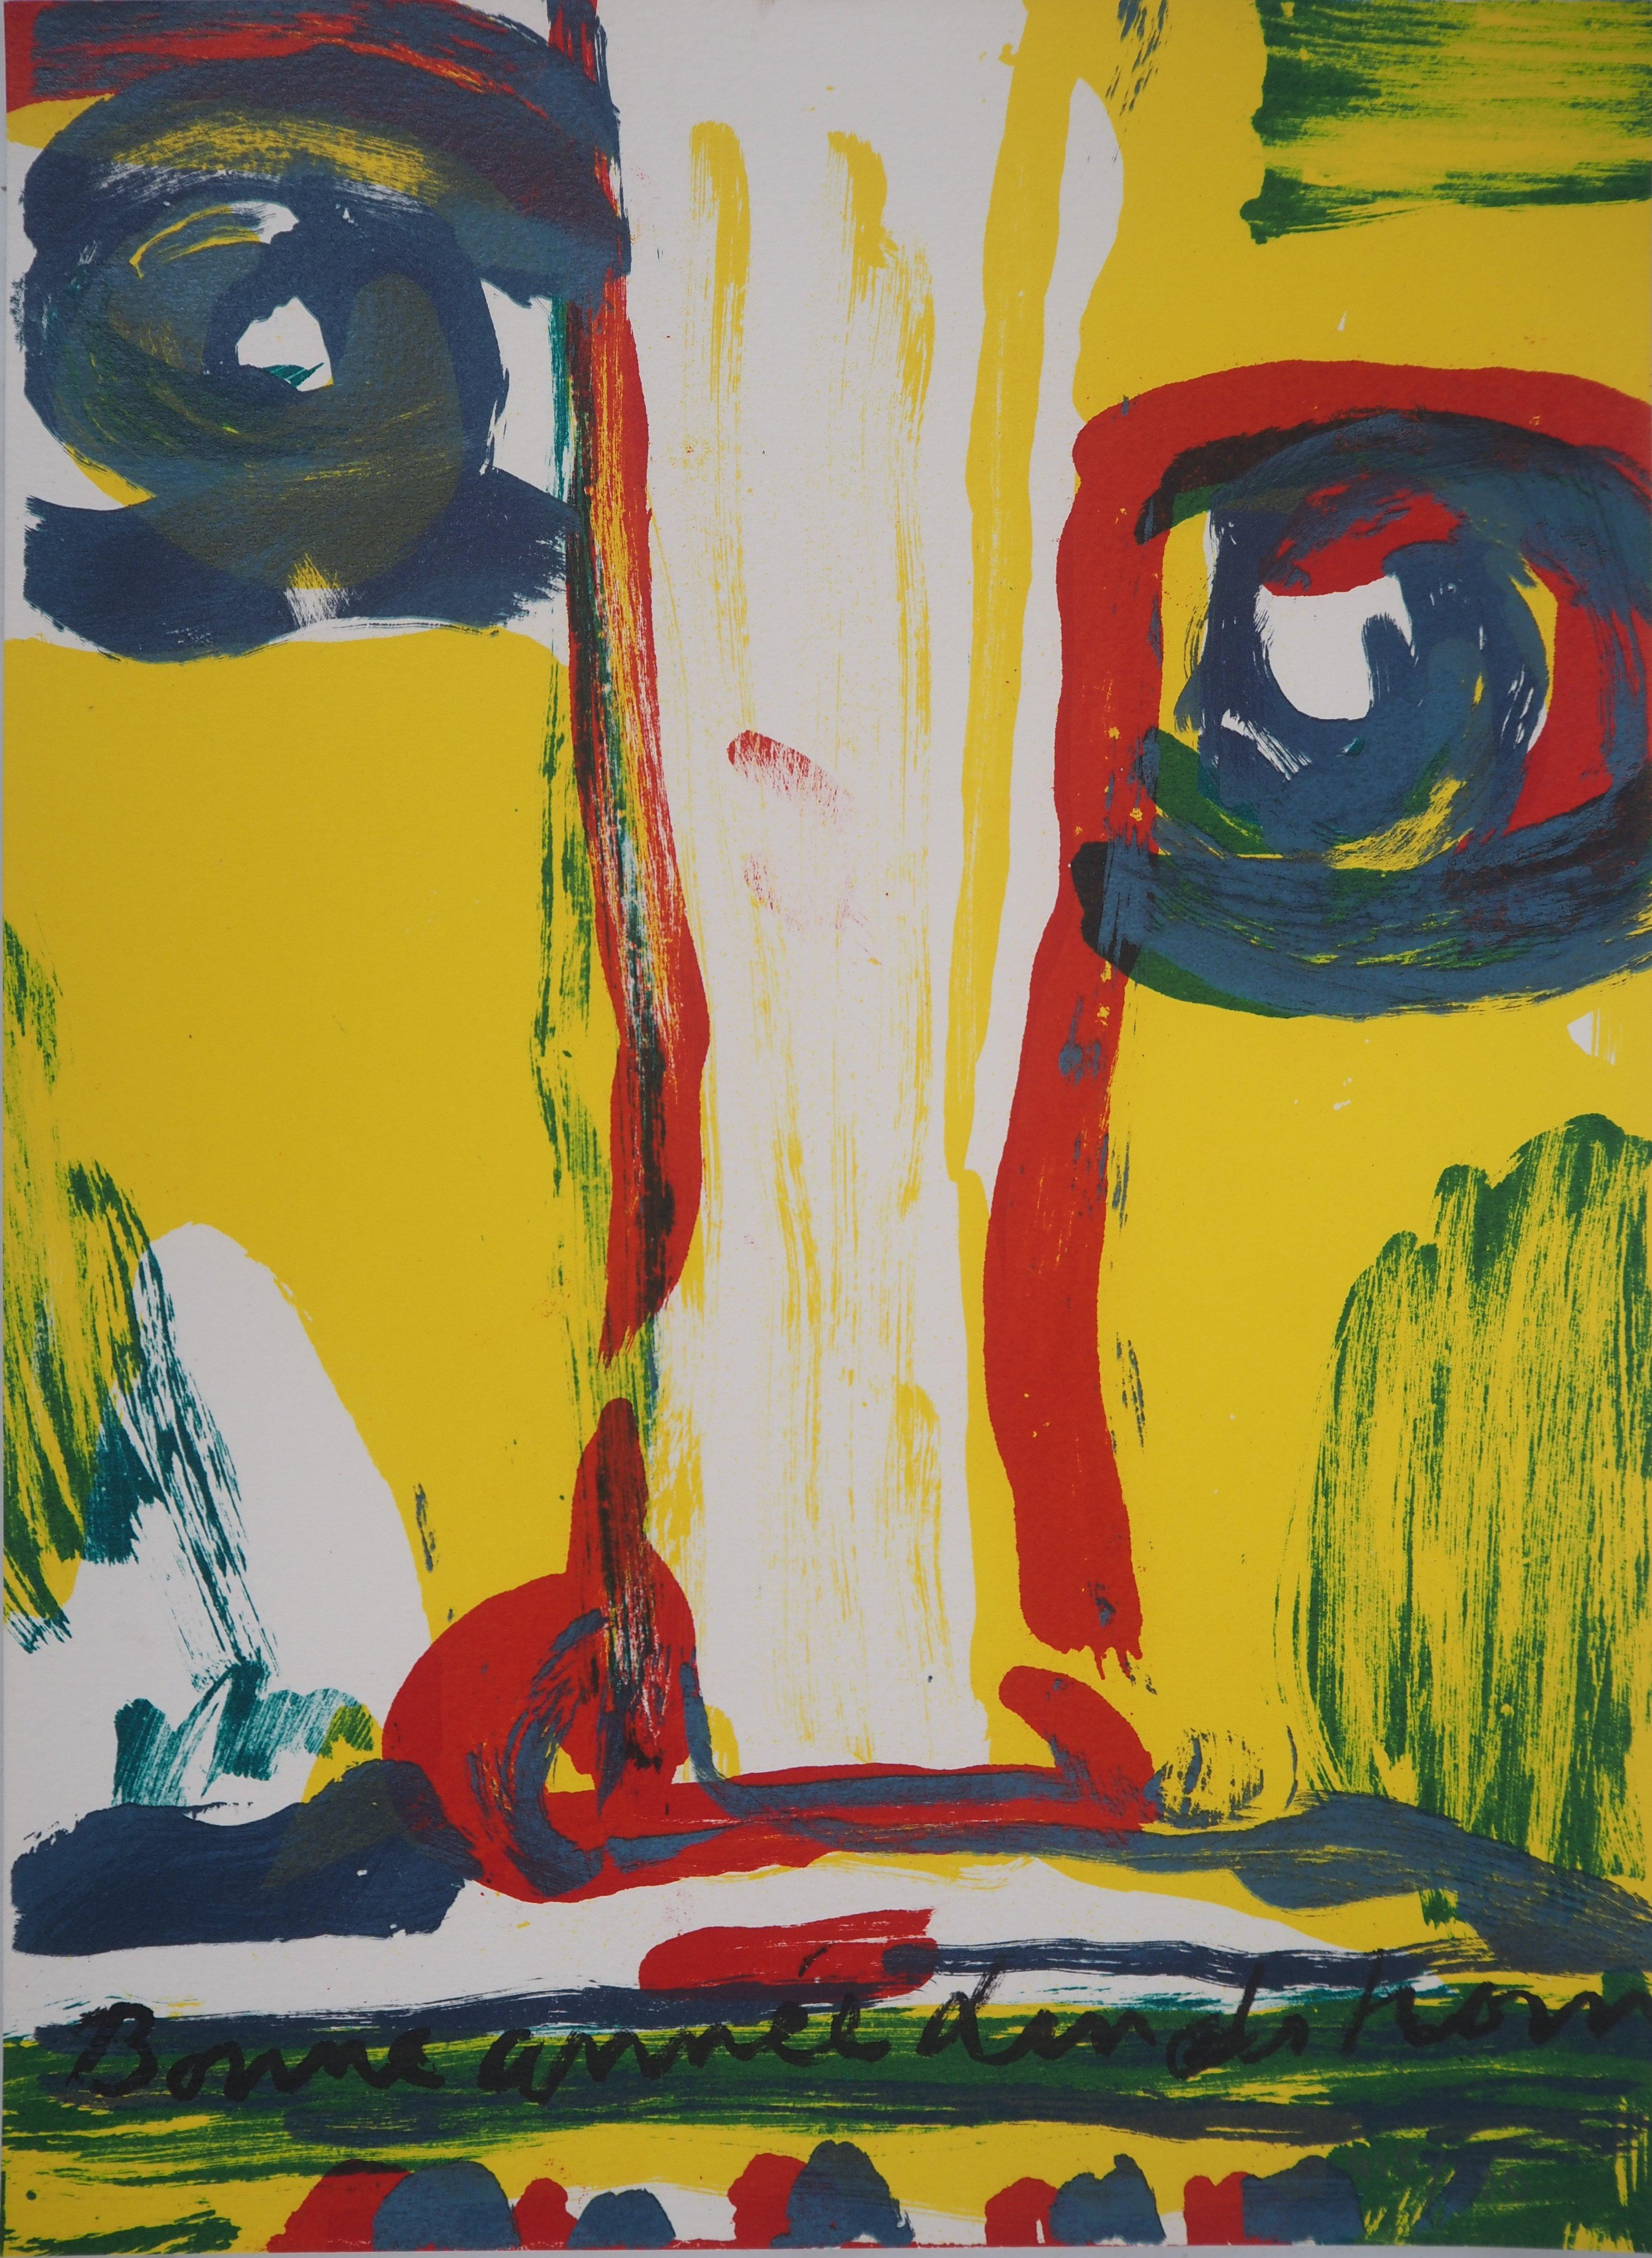 Totem Portrait in Yellow - Original lithograph